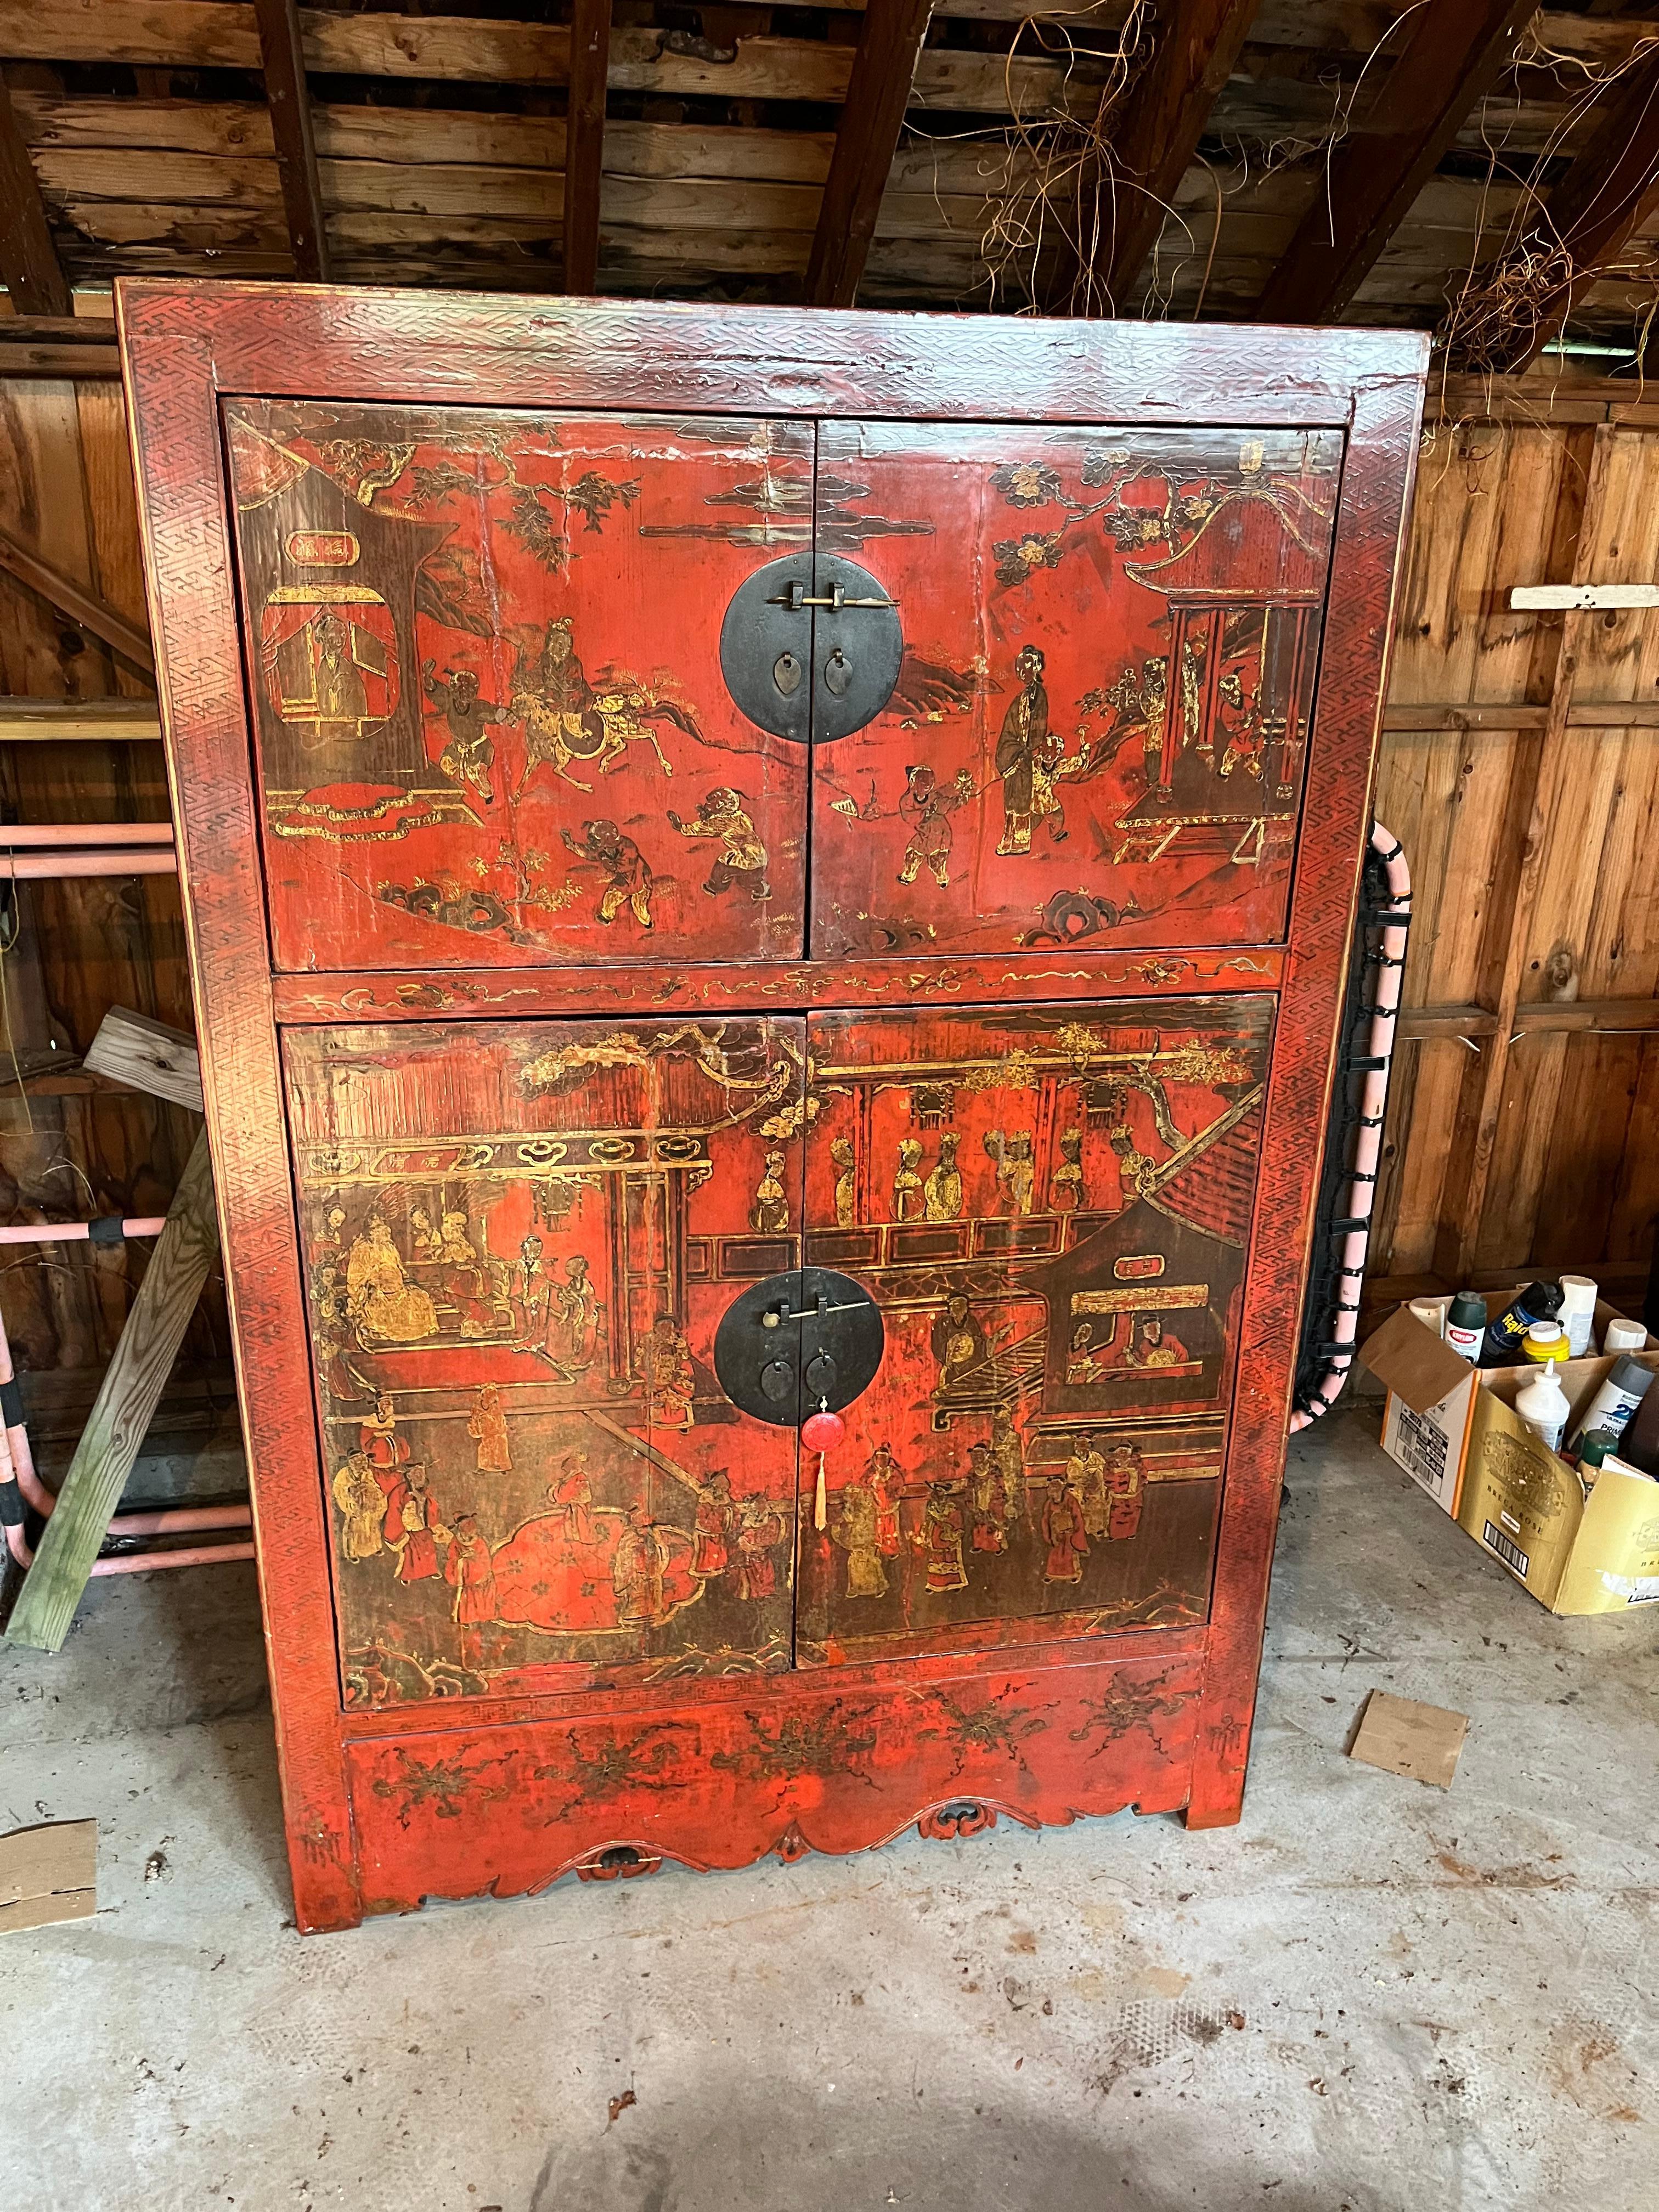 A late 18th century 4-door lacquered cabined from the Qing Dynasty, China, decorated in red lacquer with gilt and painted scenes of traditional village life of the period. The fitted interior has a shelf containing two smaller drawers. Original